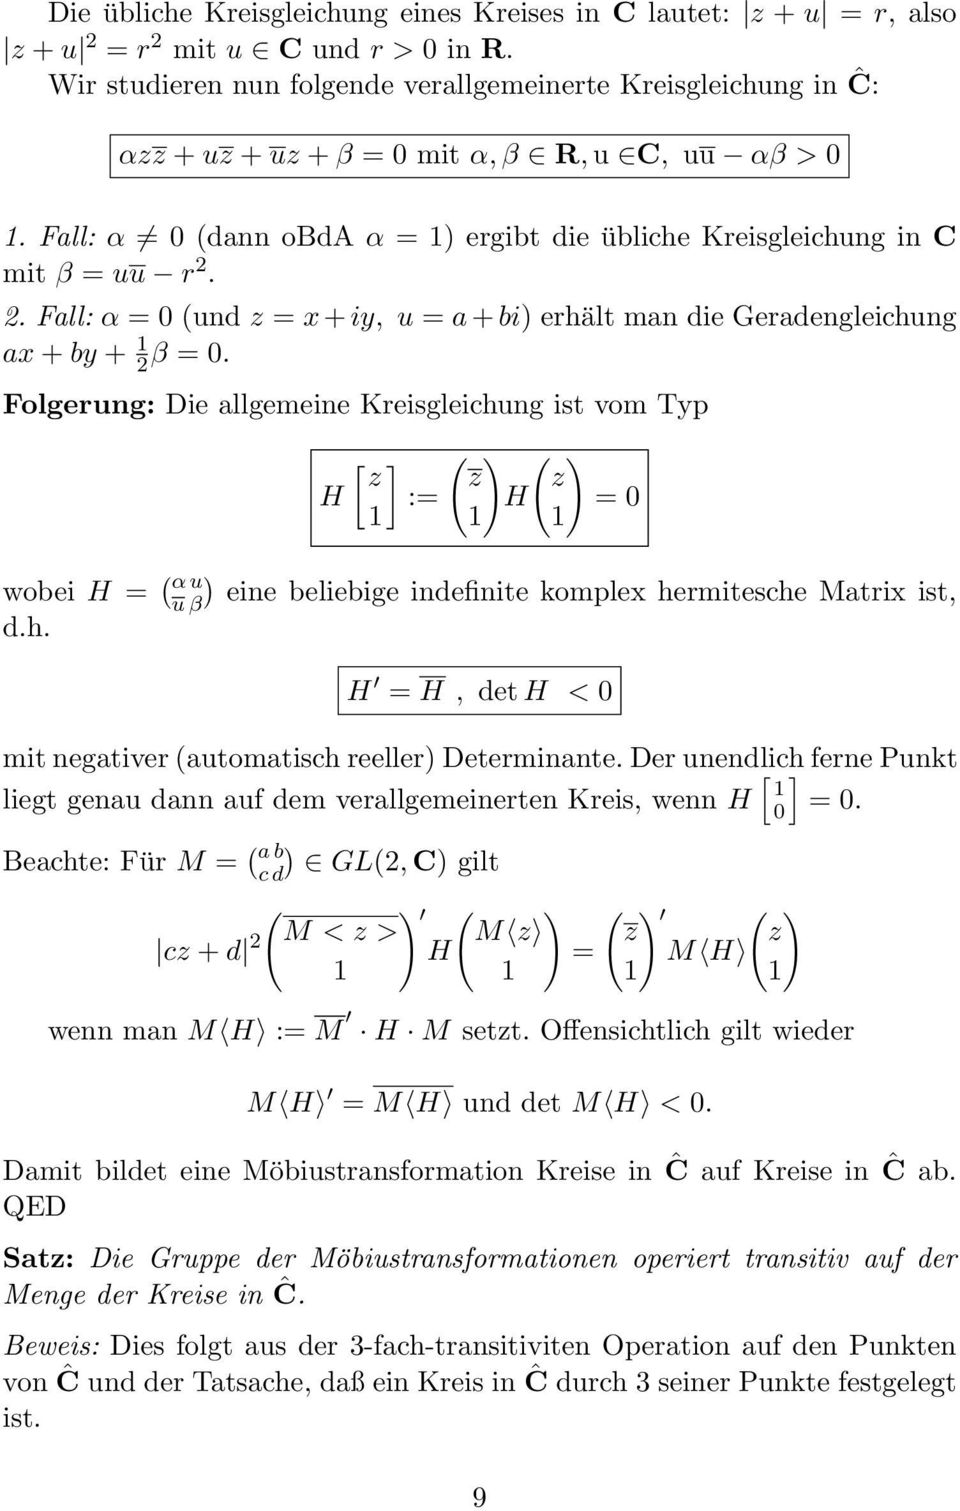 2. Fall: α = 0 (und z = x + iy, u = a + bi) erhält man die Geradengleichung ax + by + 1 2 β = 0.